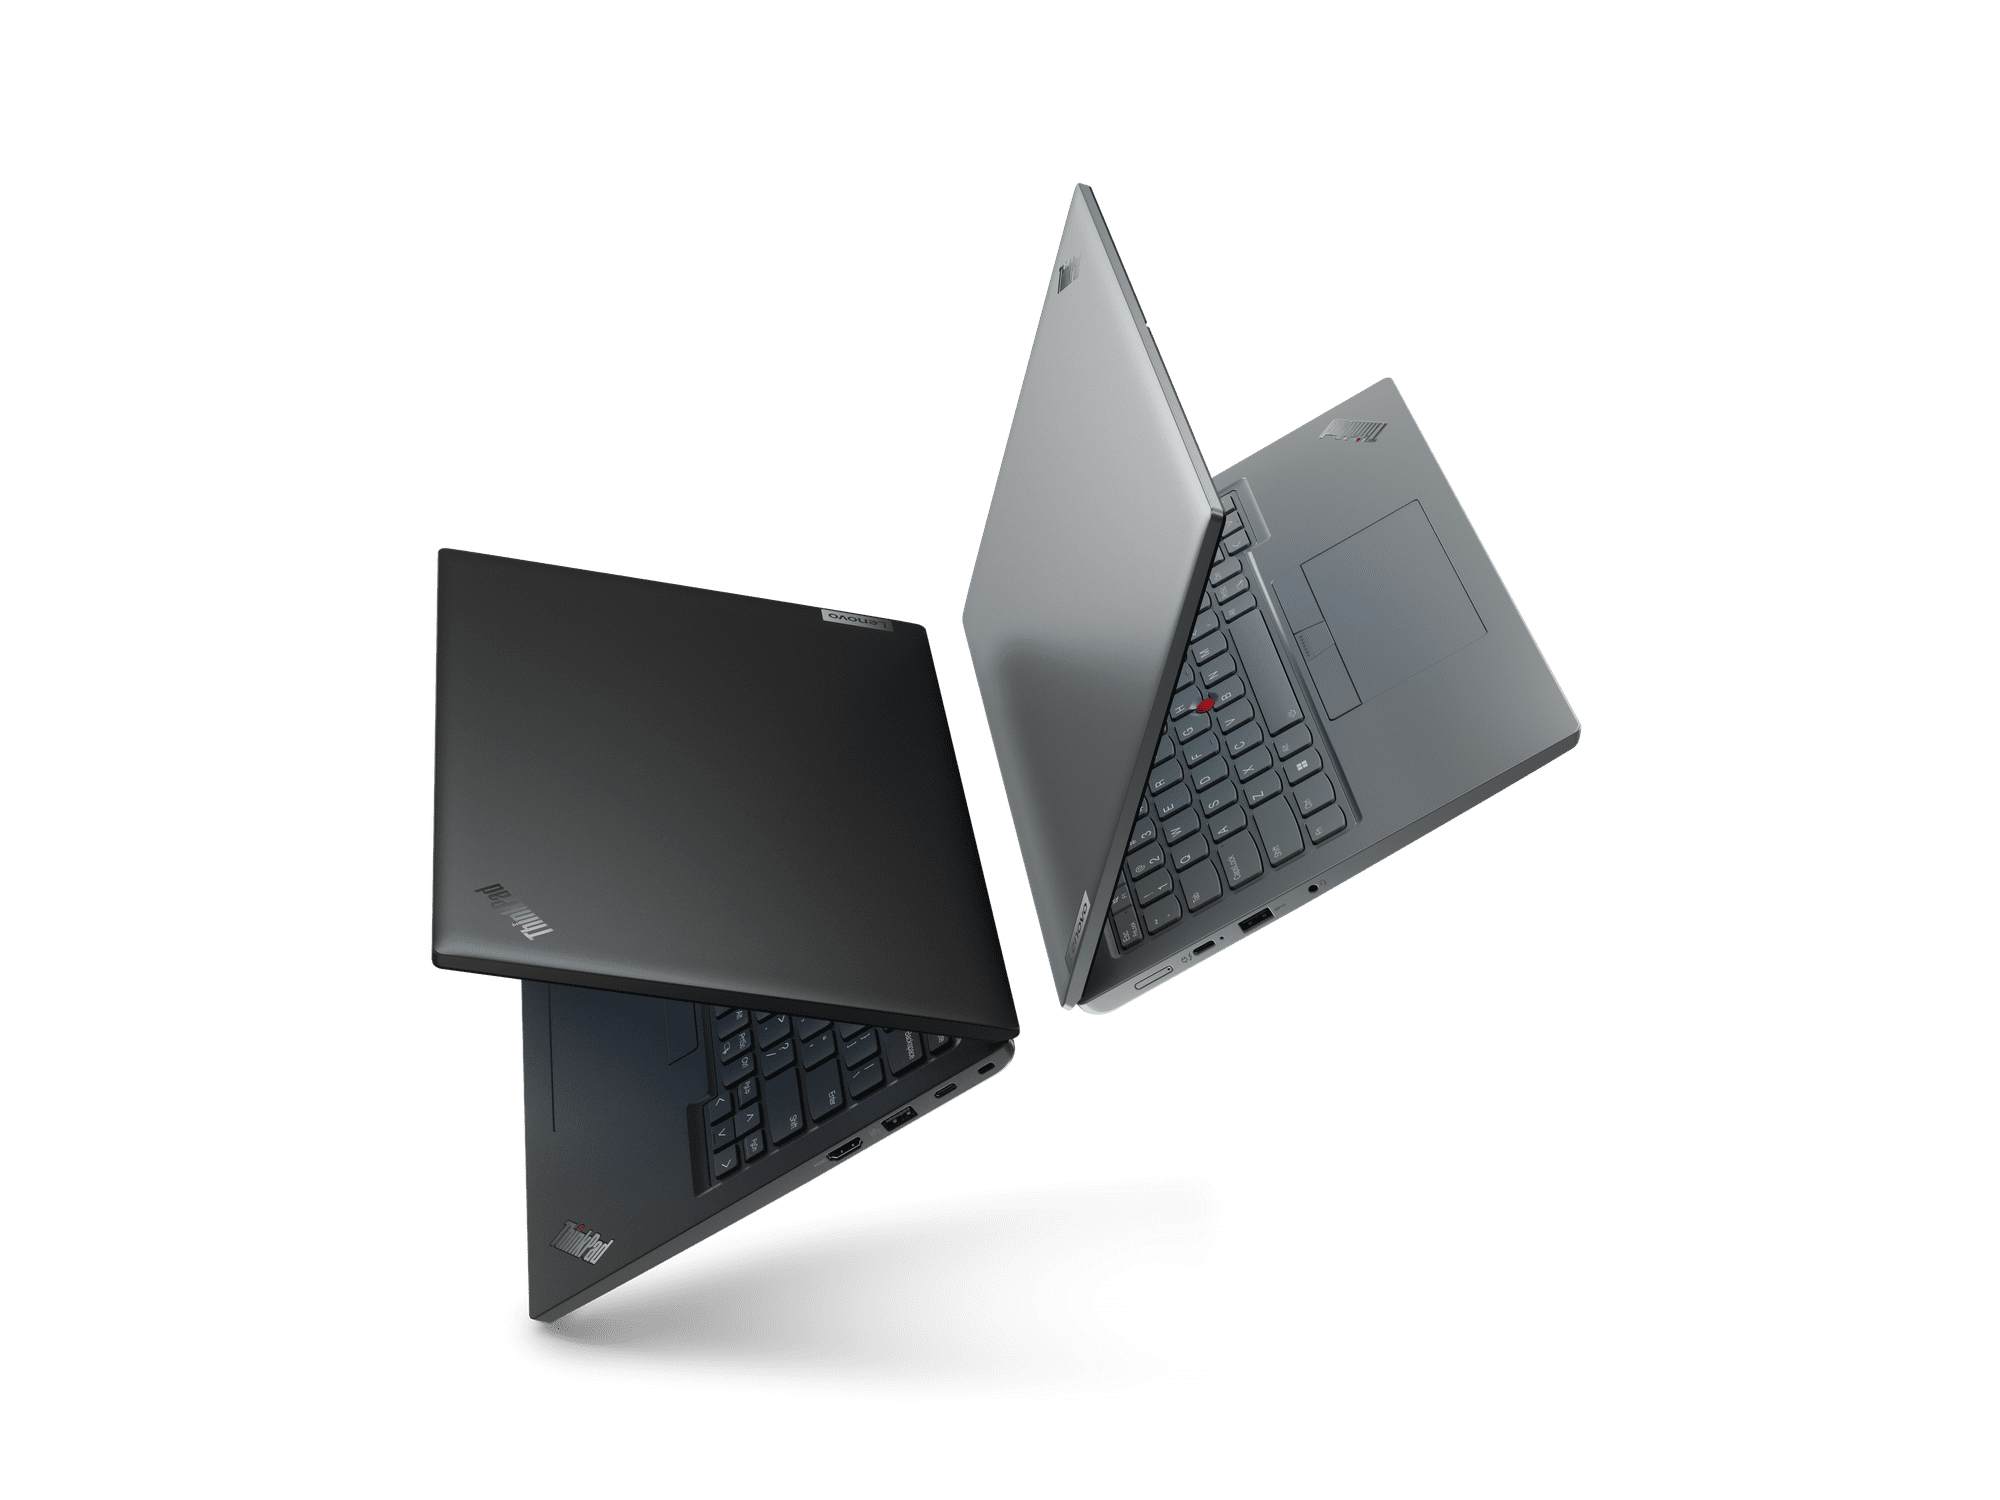 Unleashing Innovation and Better Sustainability of Lenovo’s Latest ThinkPad L Series and X Series Laptops